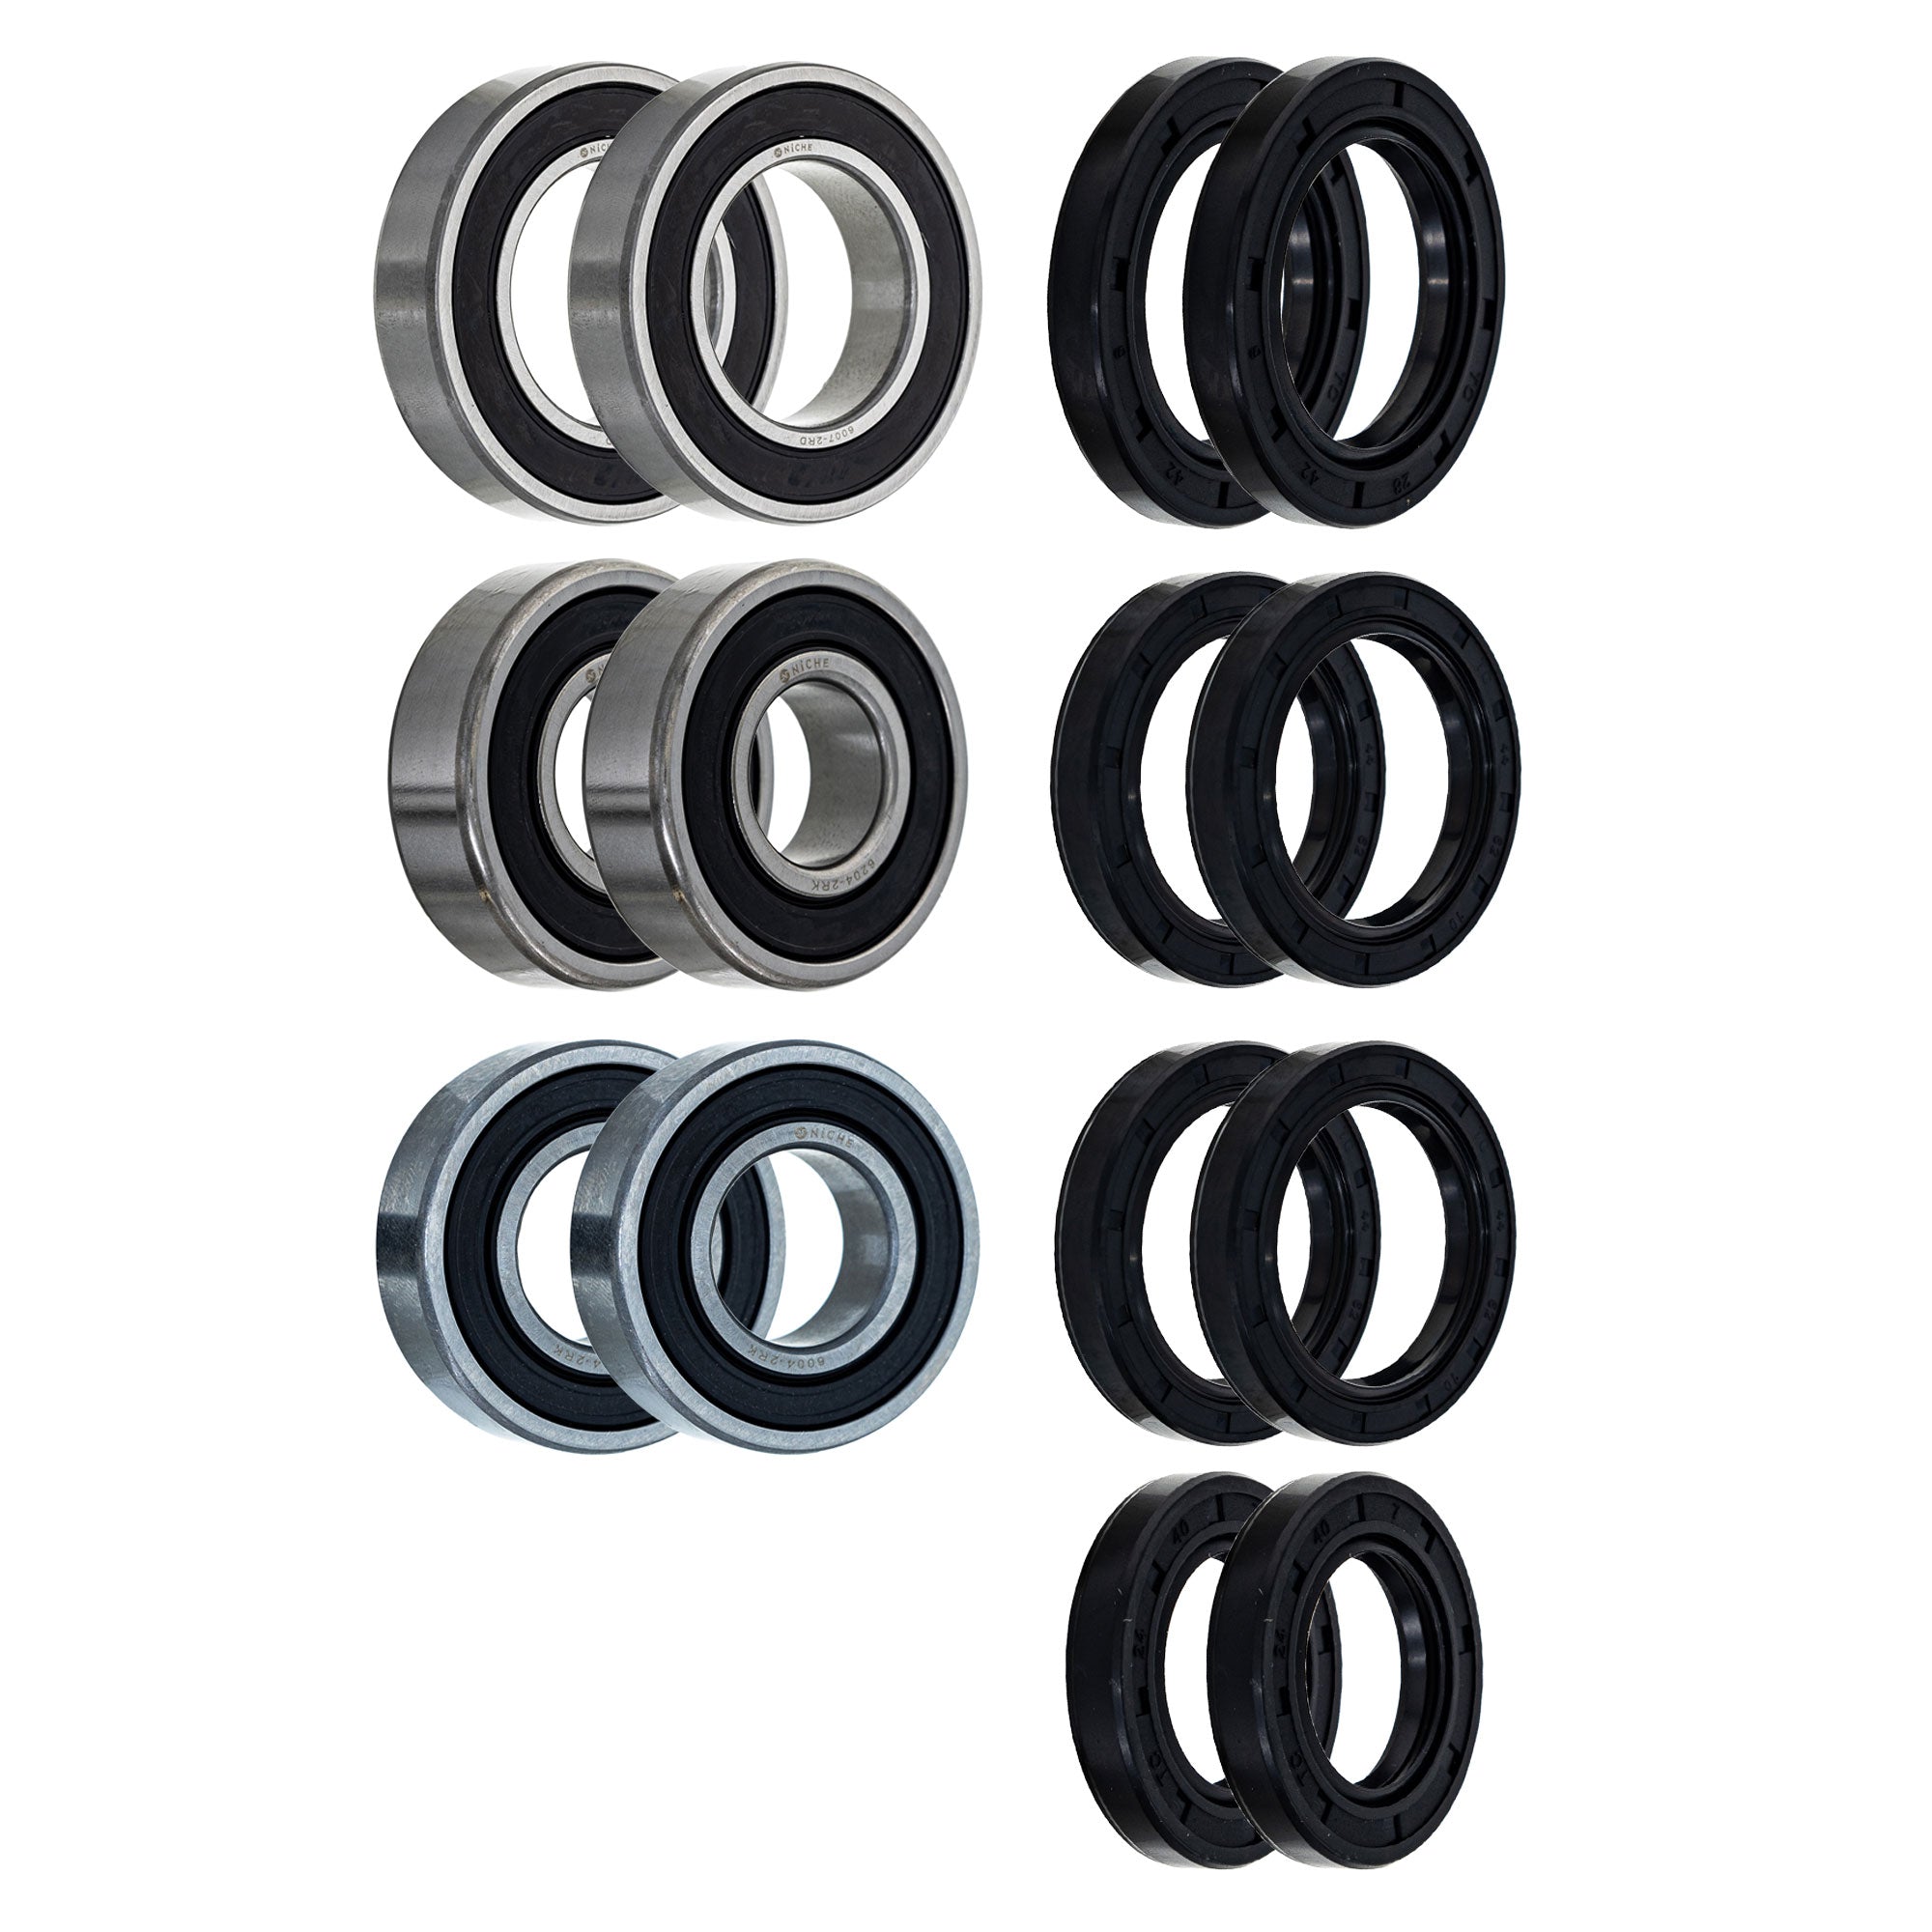 Wheel Bearing Seal Kit for zOTHER Grizzly NICHE MK1008444